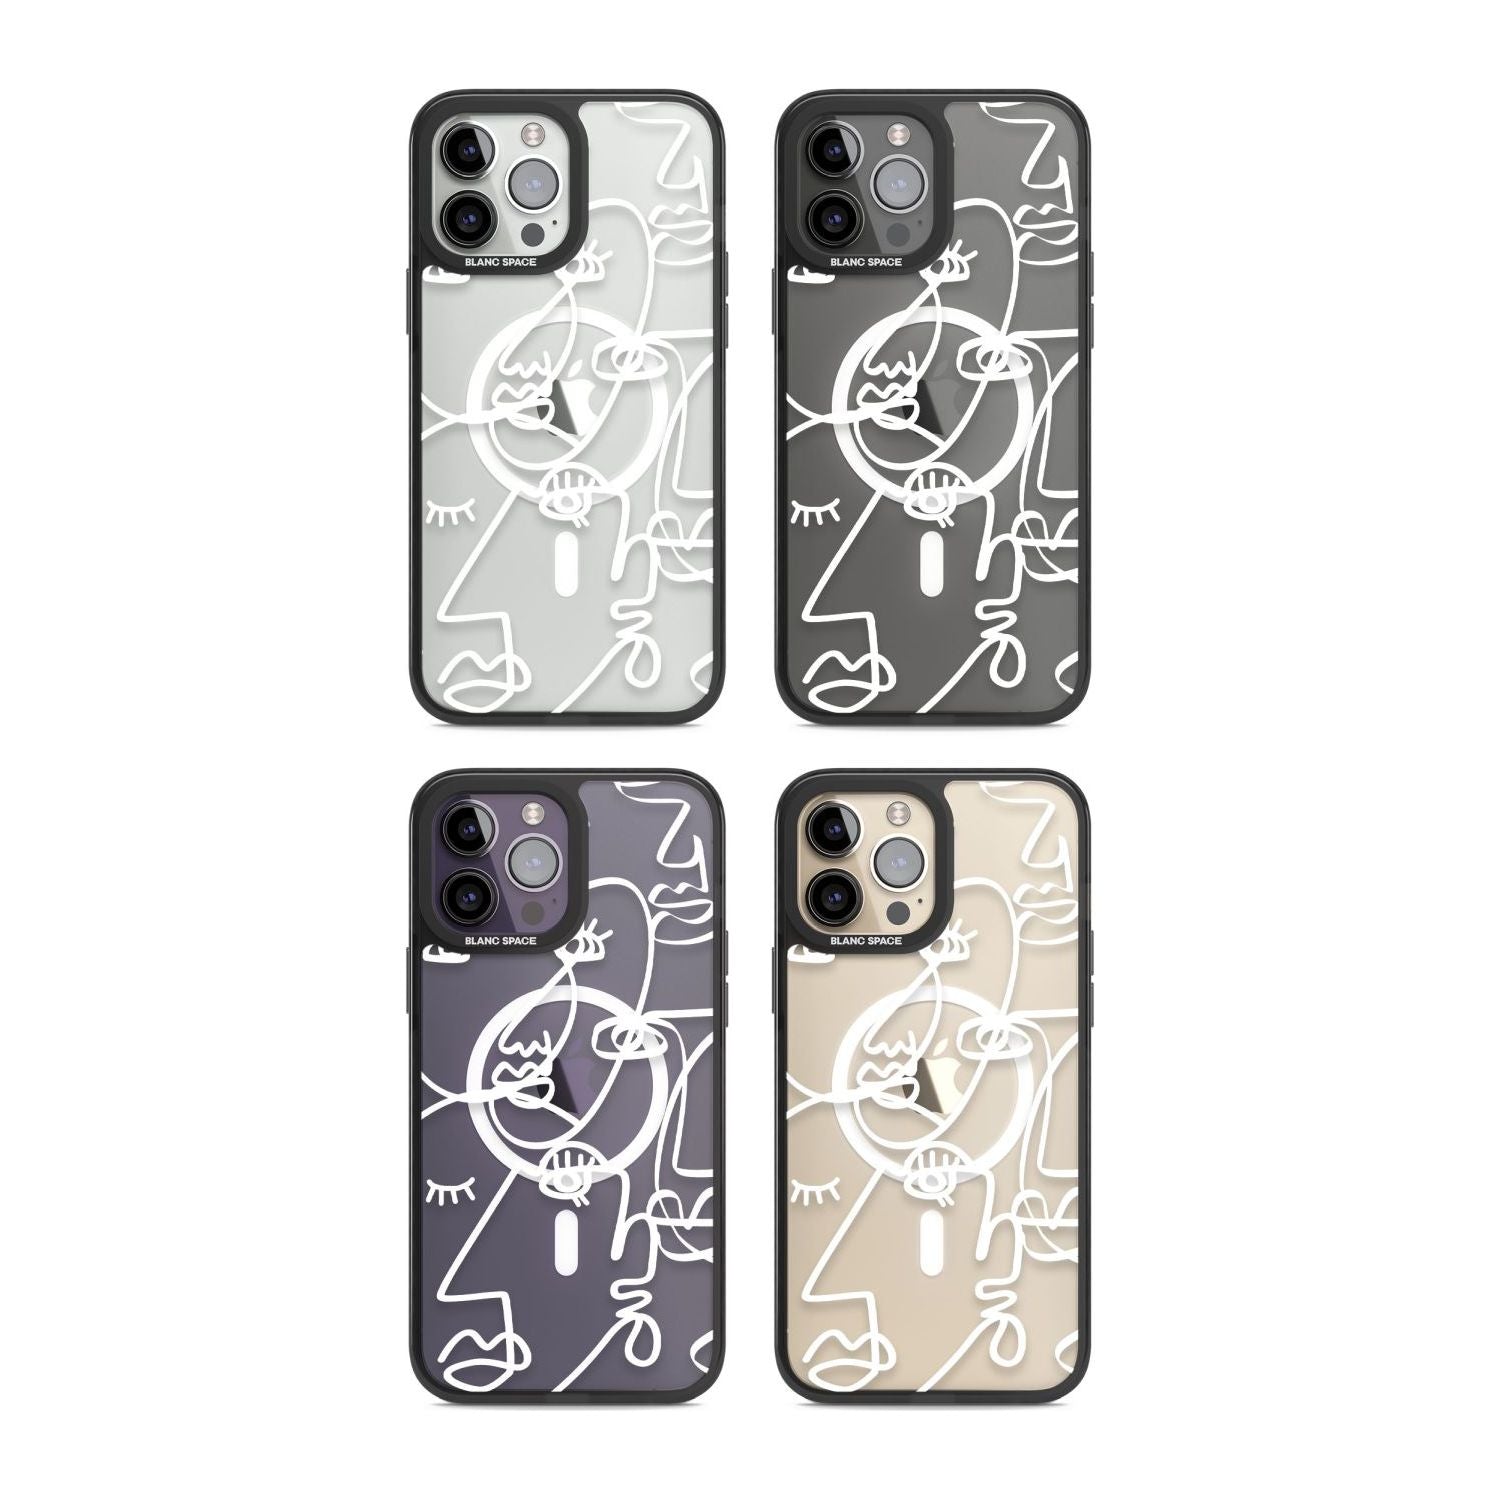 Abstract Continuous Line Faces White on Clear Phone Case iPhone 15 Pro Max / Black Impact Case,iPhone 15 Plus / Black Impact Case,iPhone 15 Pro / Black Impact Case,iPhone 15 / Black Impact Case,iPhone 15 Pro Max / Impact Case,iPhone 15 Plus / Impact Case,iPhone 15 Pro / Impact Case,iPhone 15 / Impact Case,iPhone 15 Pro Max / Magsafe Black Impact Case,iPhone 15 Plus / Magsafe Black Impact Case,iPhone 15 Pro / Magsafe Black Impact Case,iPhone 15 / Magsafe Black Impact Case,iPhone 14 Pro Max / Black Impact Cas